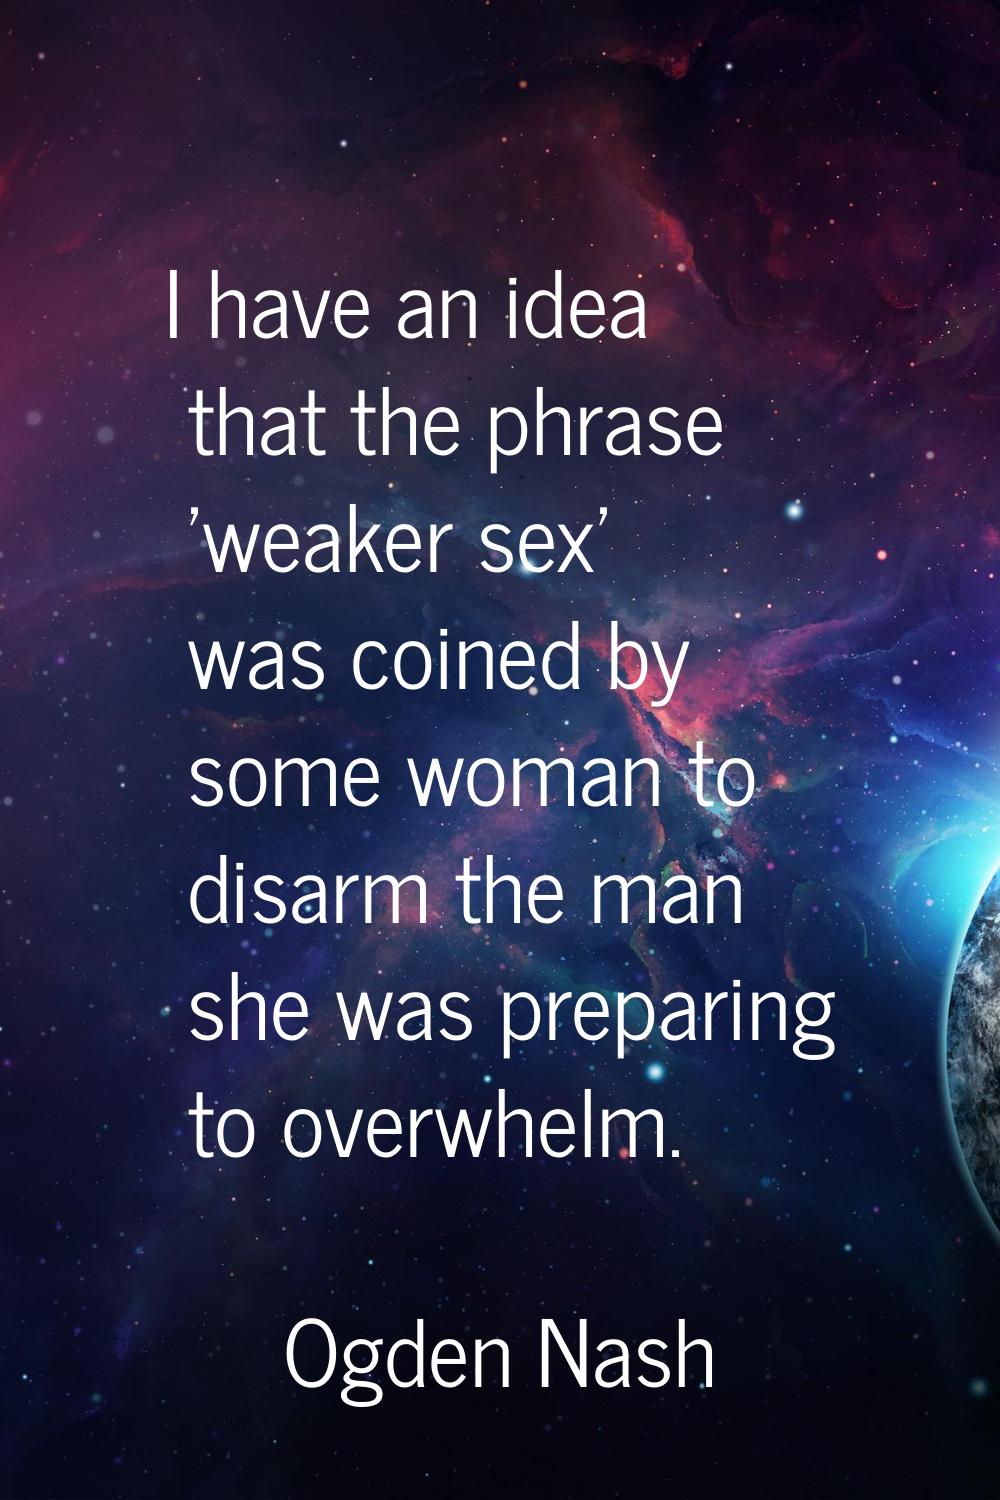 I have an idea that the phrase 'weaker sex' was coined by some woman to disarm the man she was prep